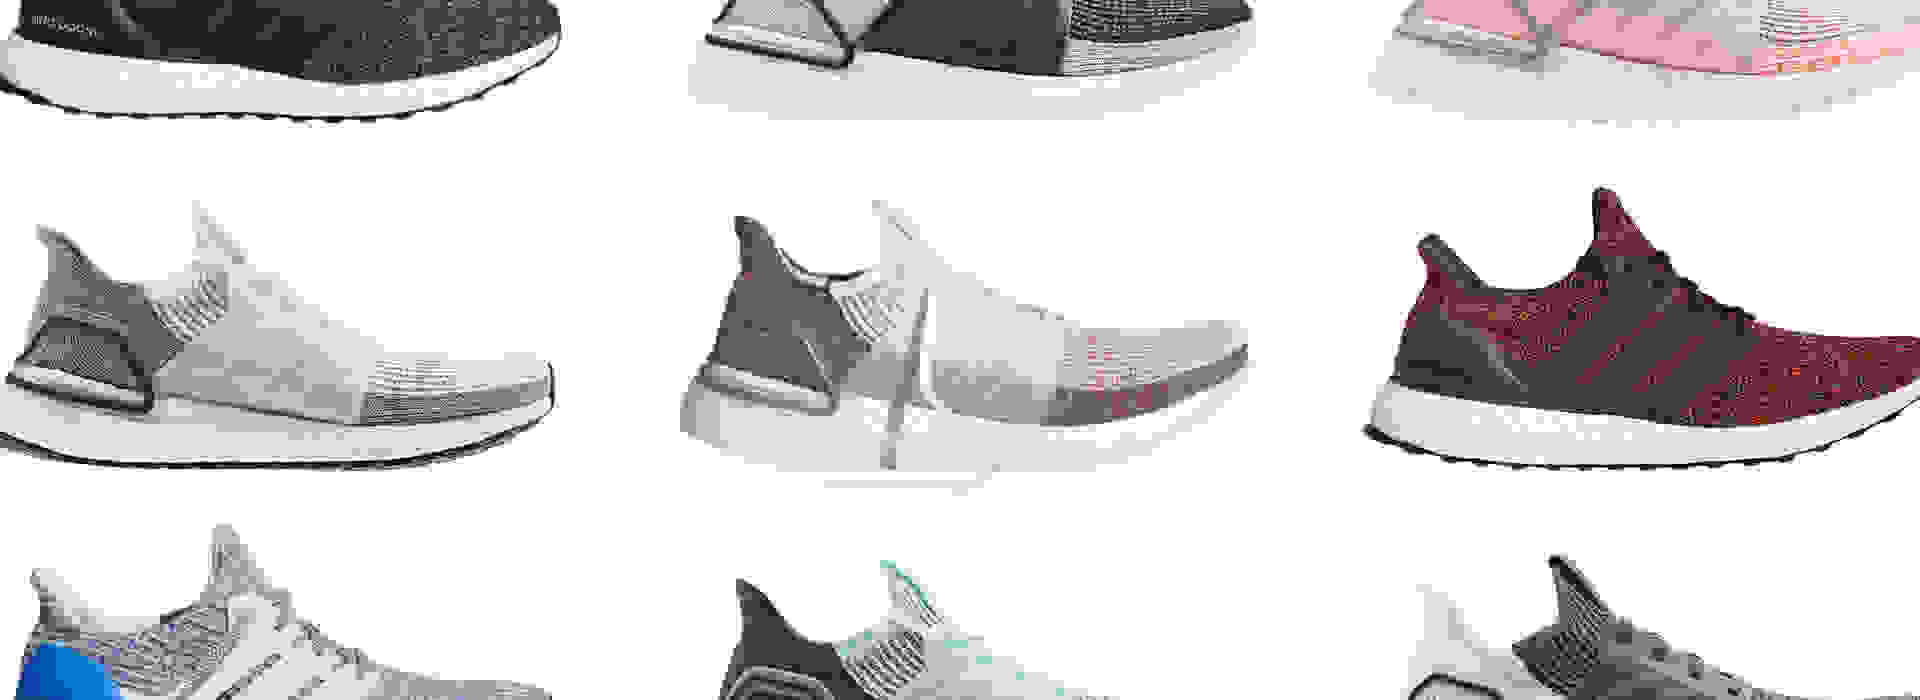 ultra boost sizing compared to nmd